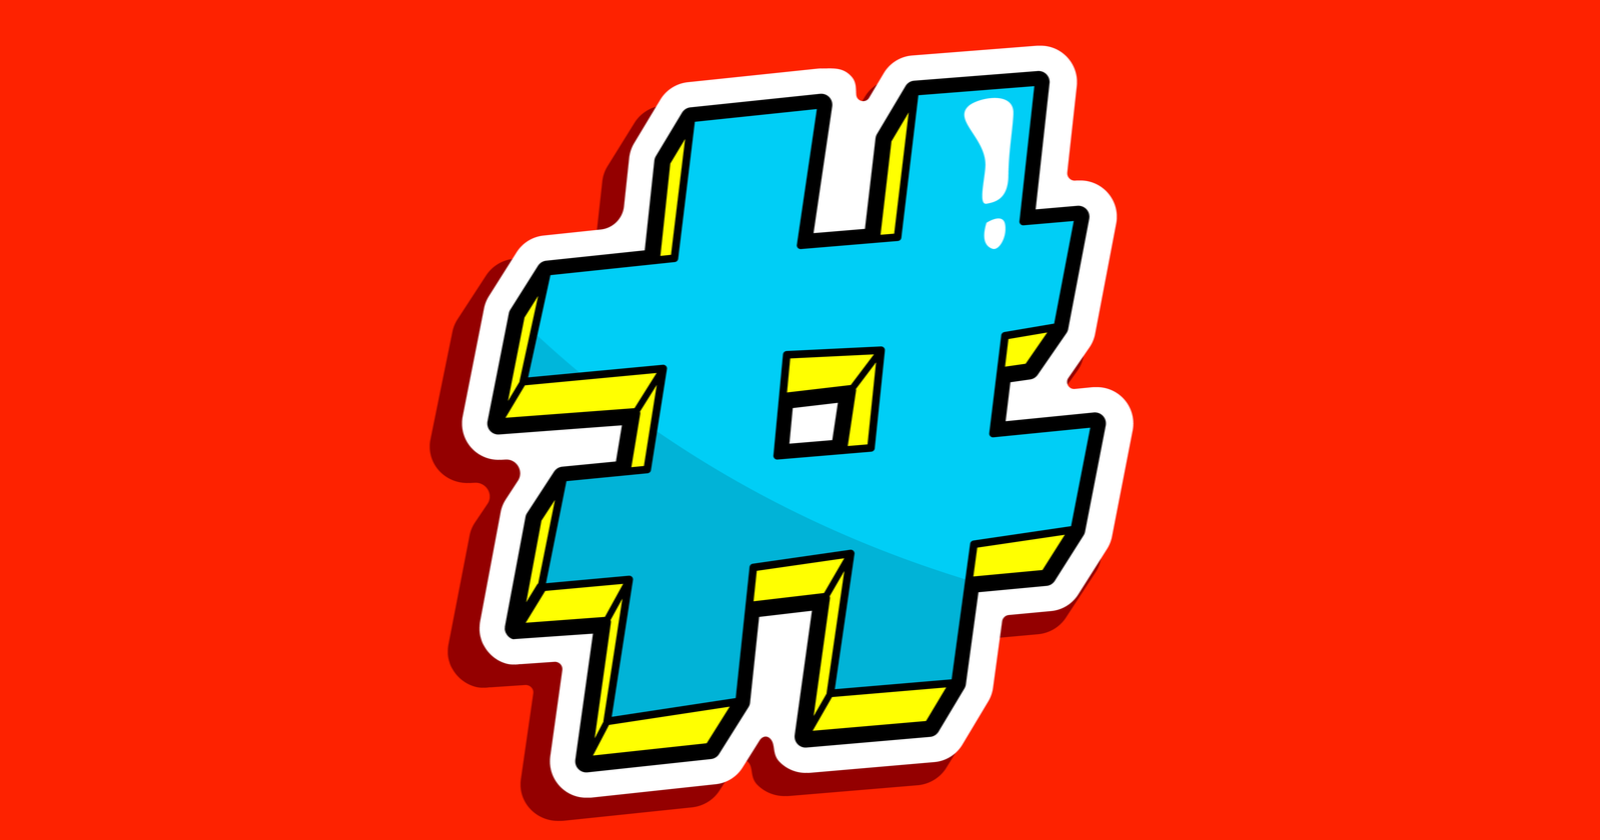 The Ultimate Guide to Twitter Hashtags